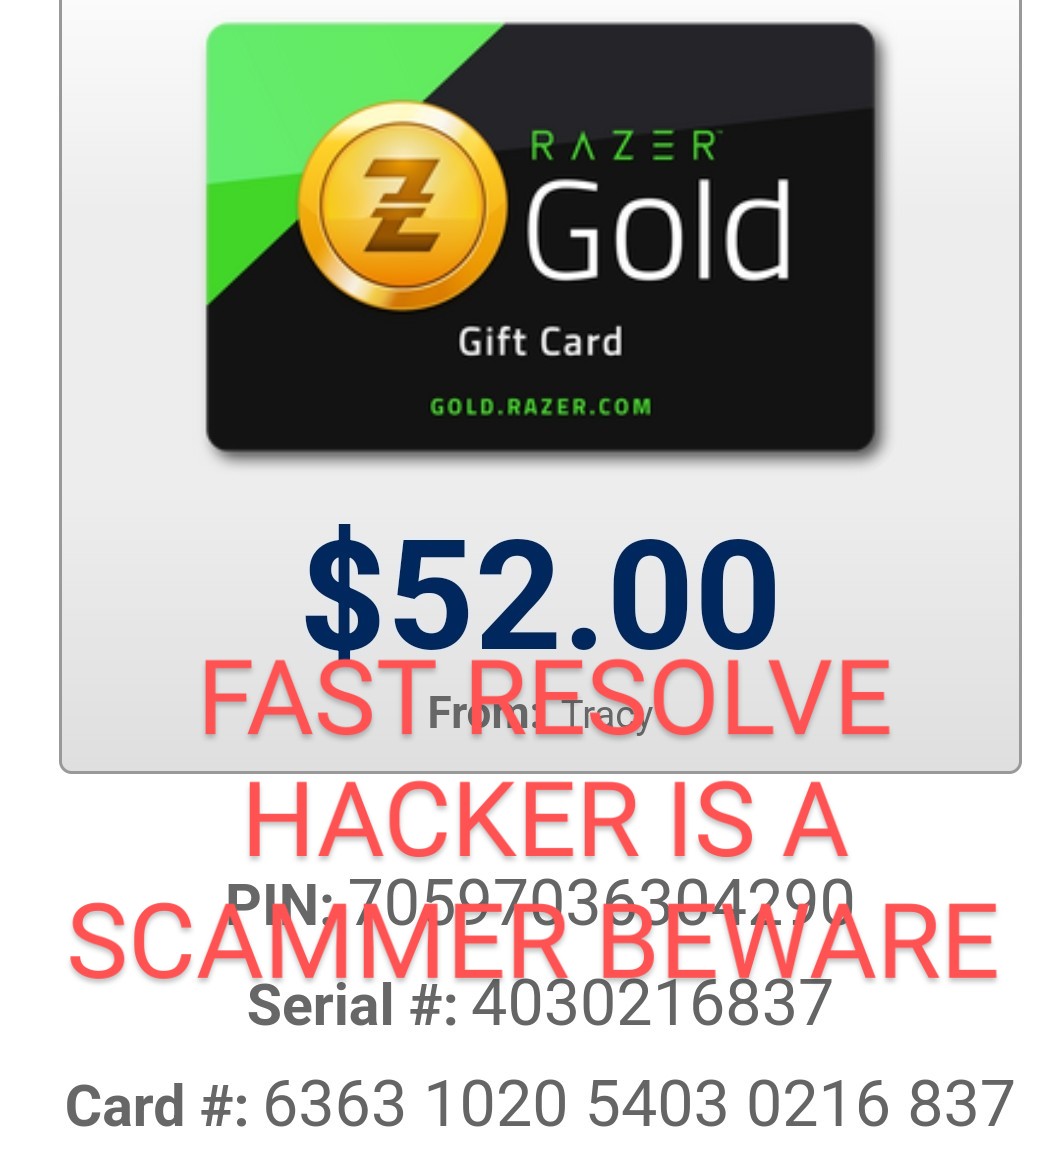 Only accepts gifts cards total scam 